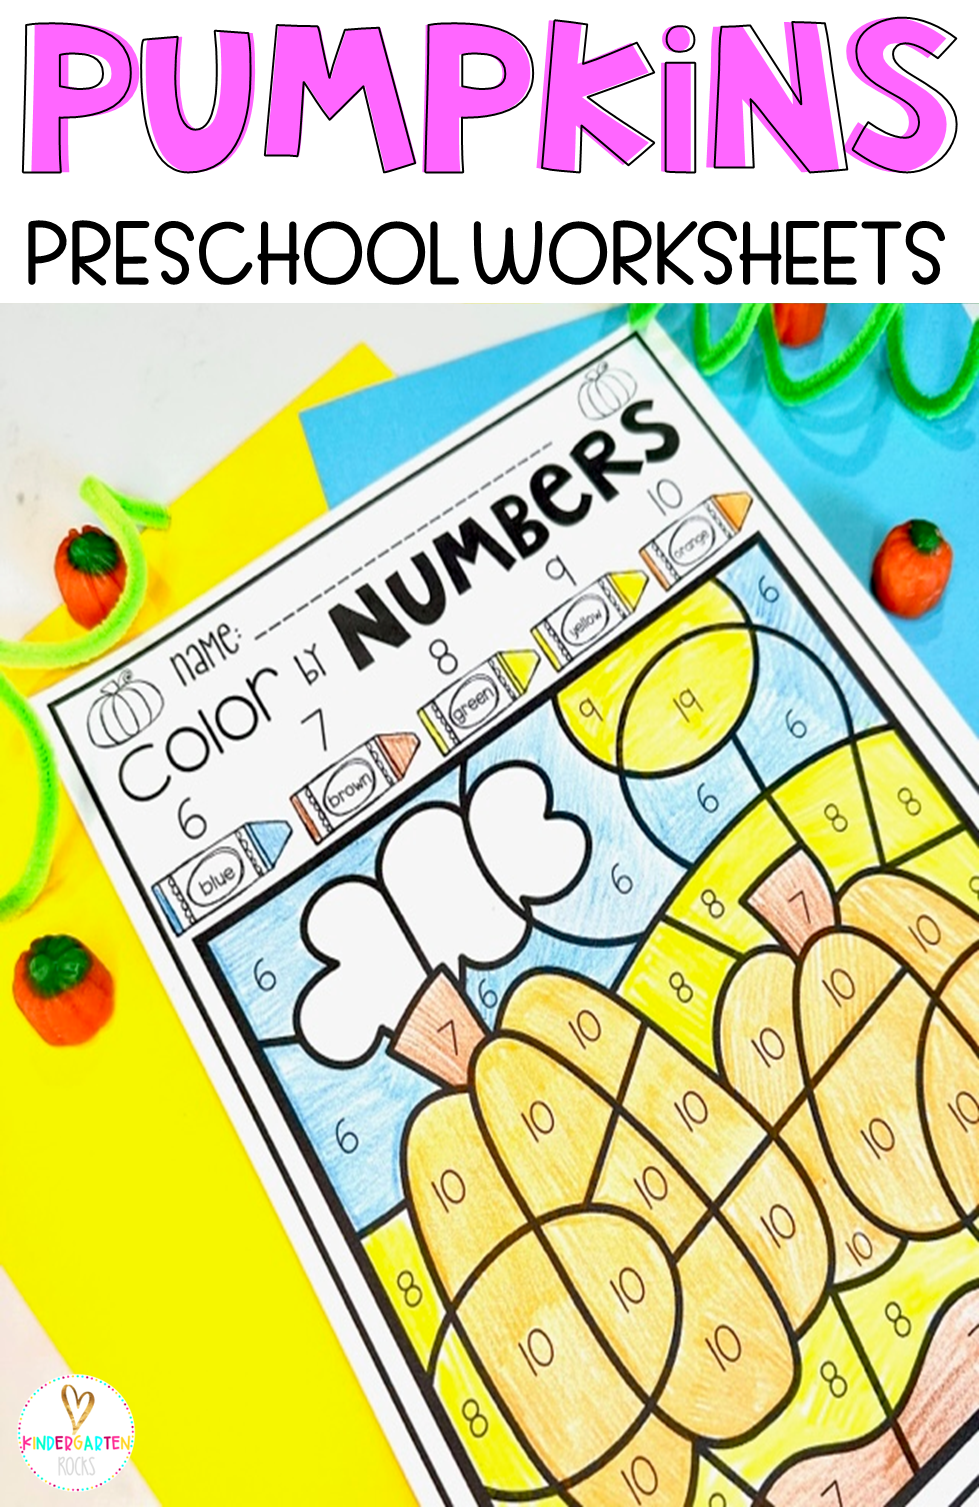 Pumpkin Math and Literacy Worksheets and Printables for Preschool is perfect for your preschool classroom. The boys and girls will color the picture by numbers.